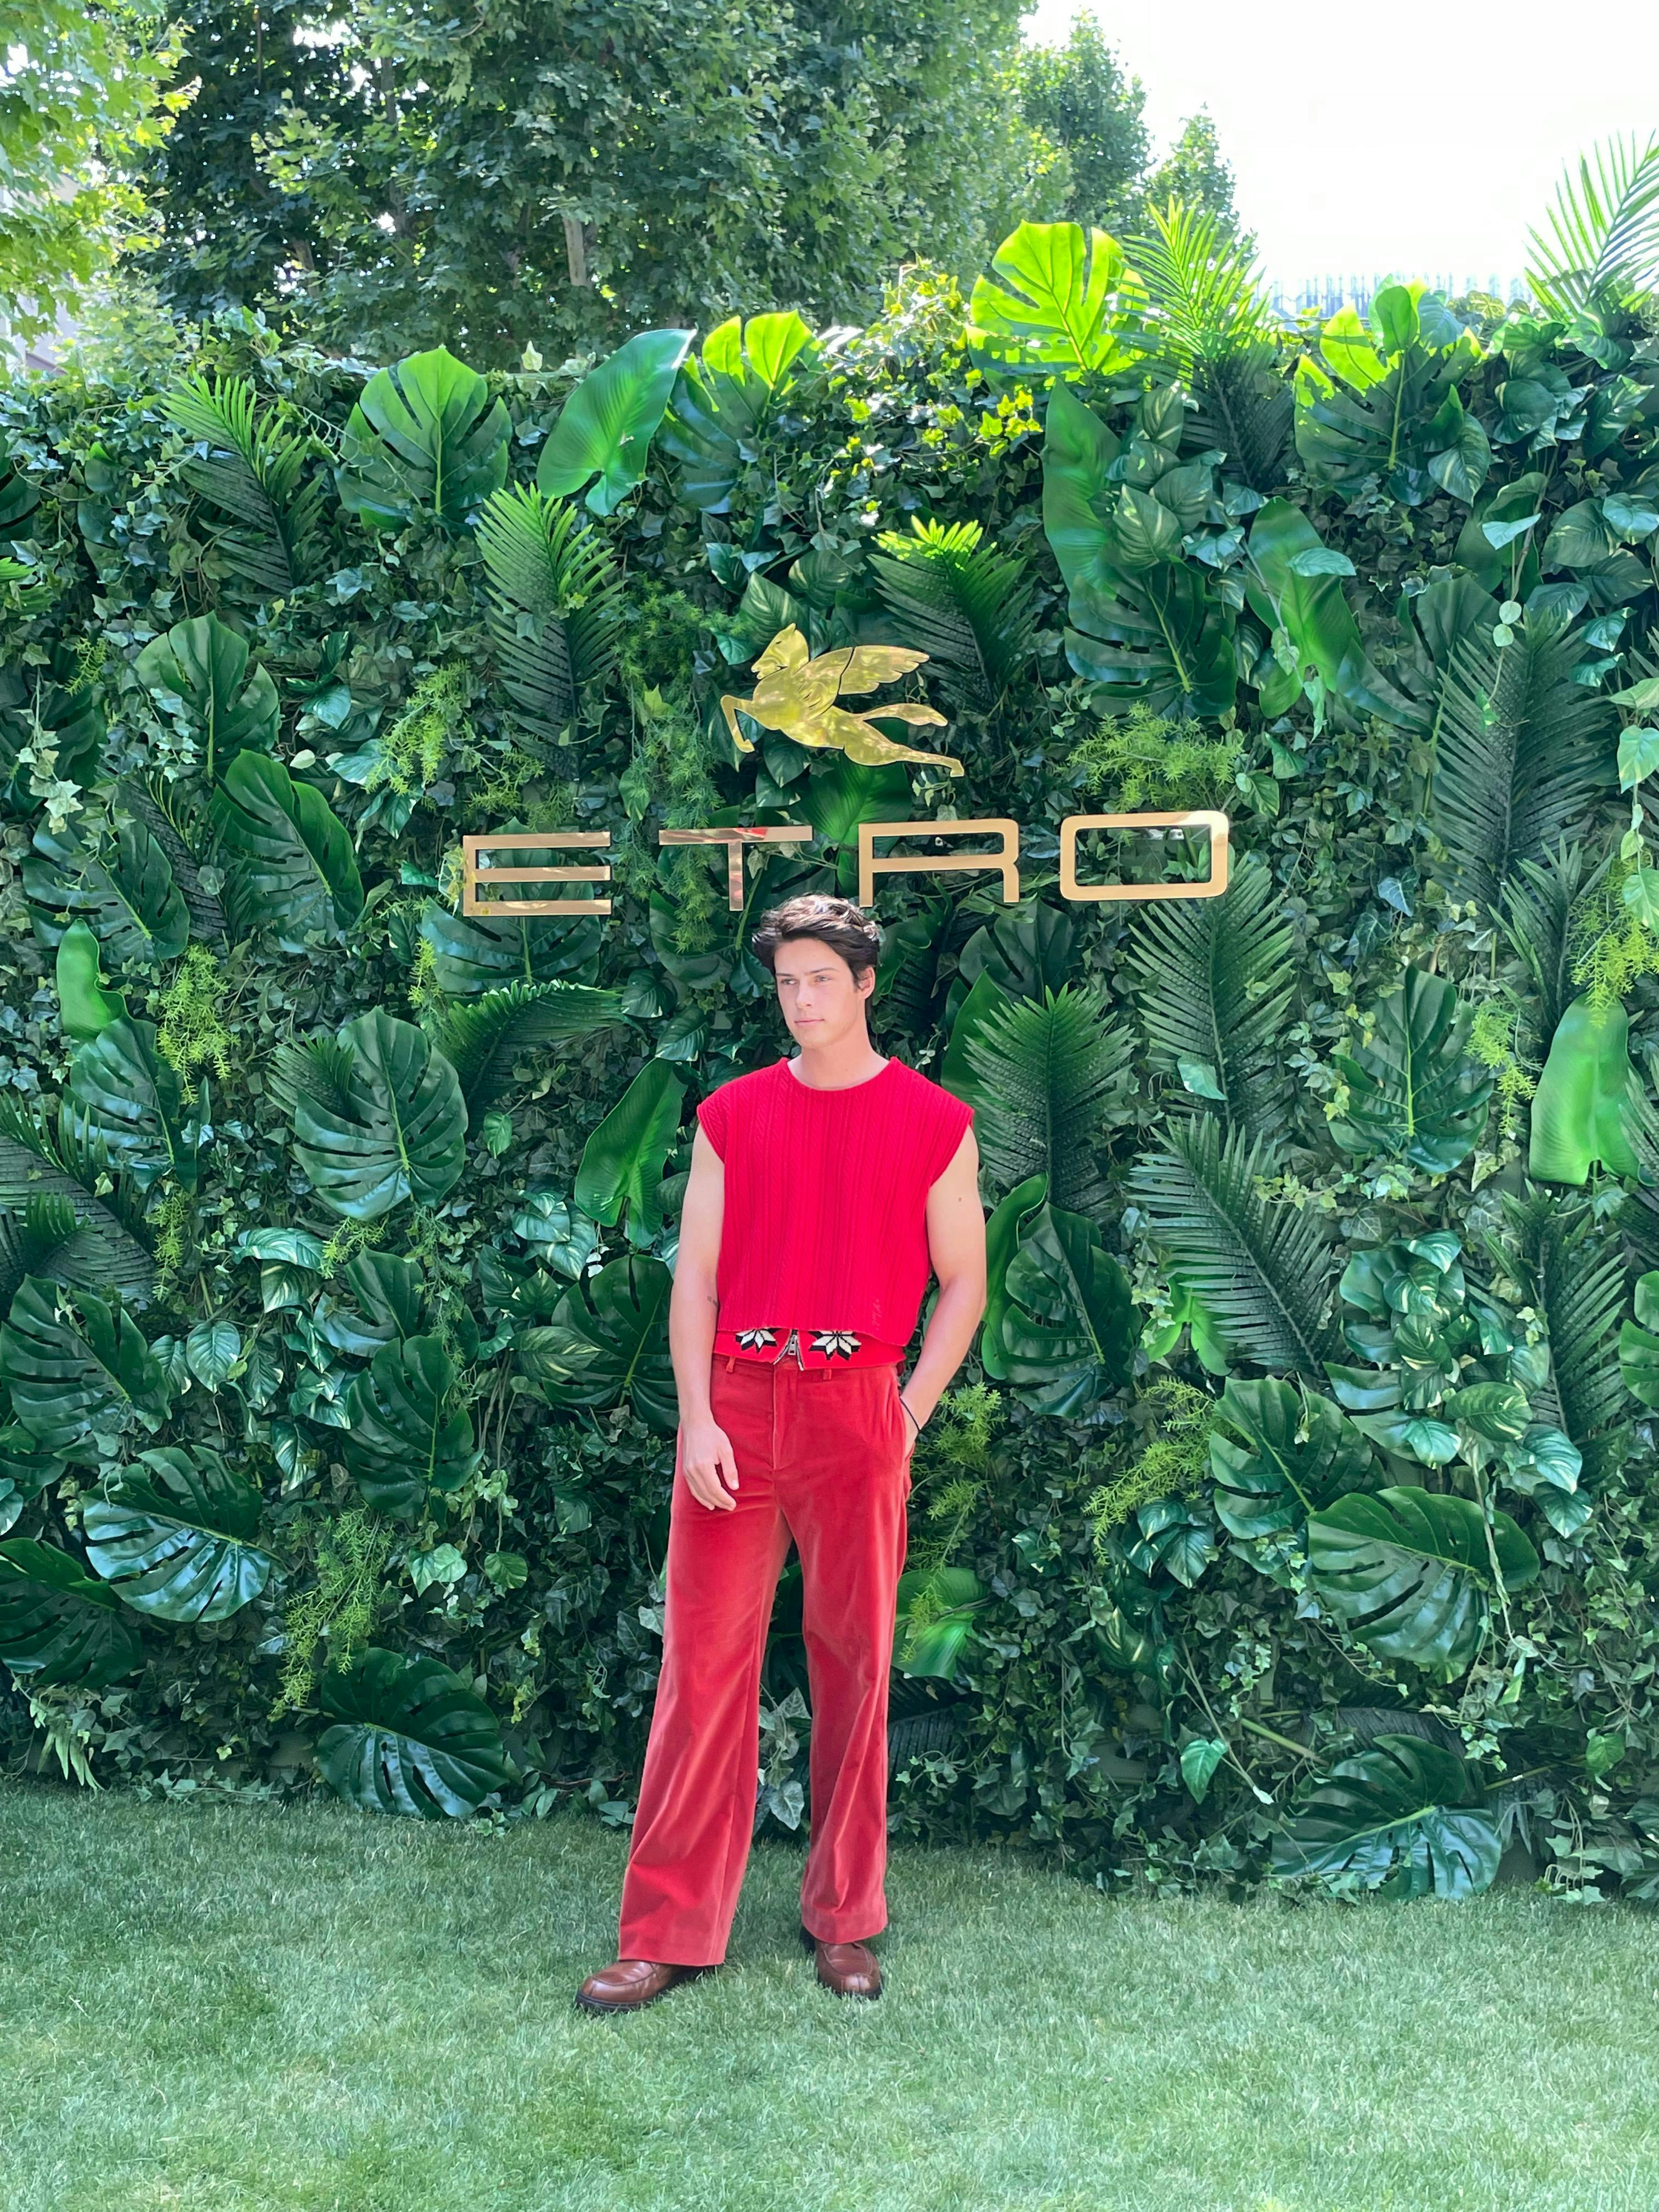 Blake Gray posing in front of a wall of greenery with a gold Etro logo. He is wearing a red sweater vest, red flared pants and brown loafers